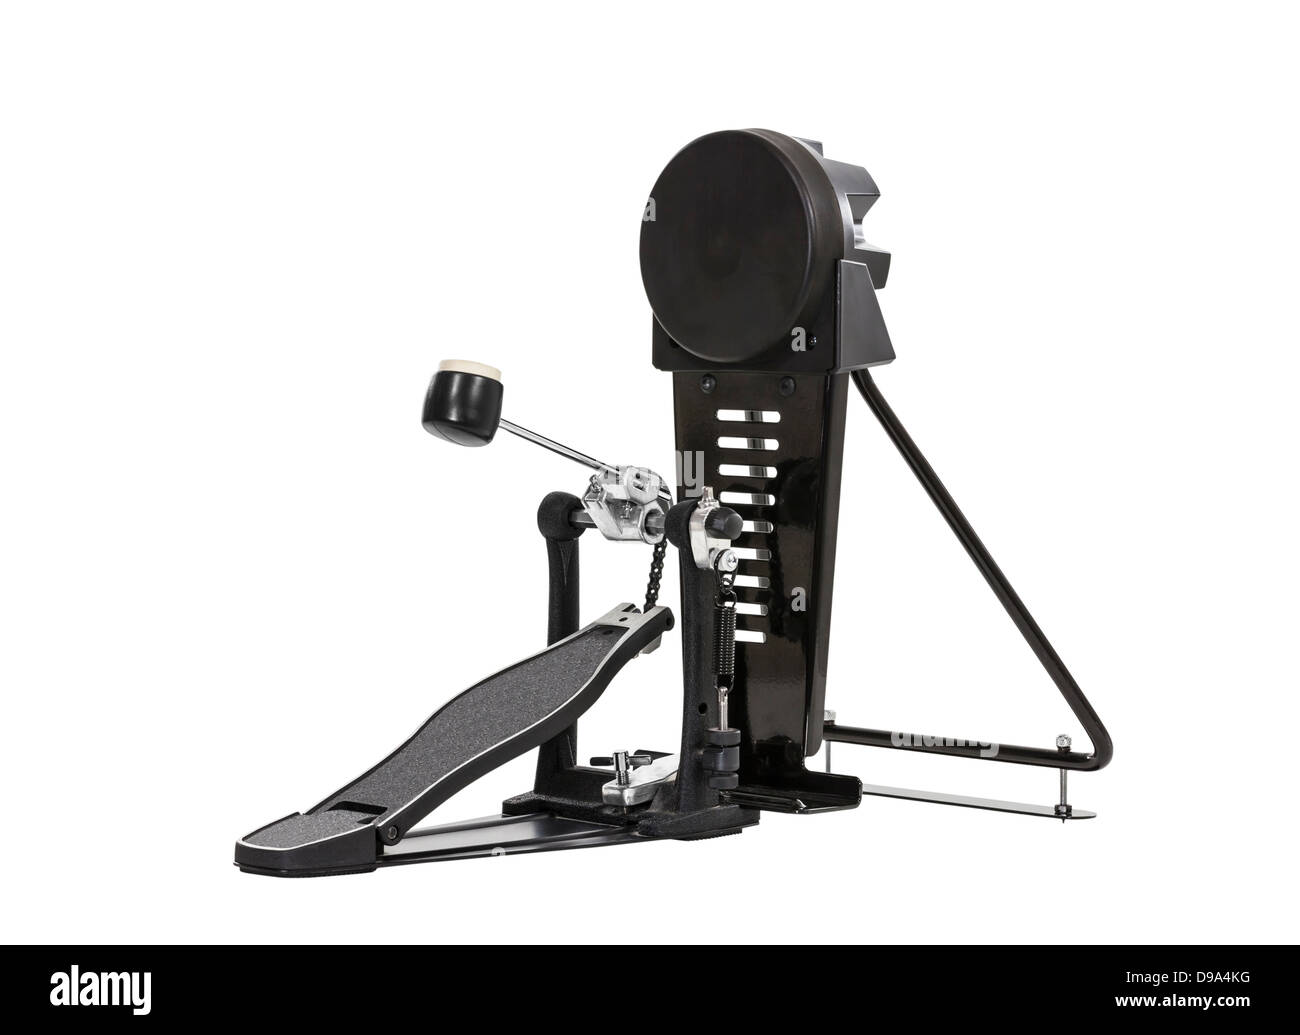 Electronic bass drum pedal isolated with clipping path. Stock Photo